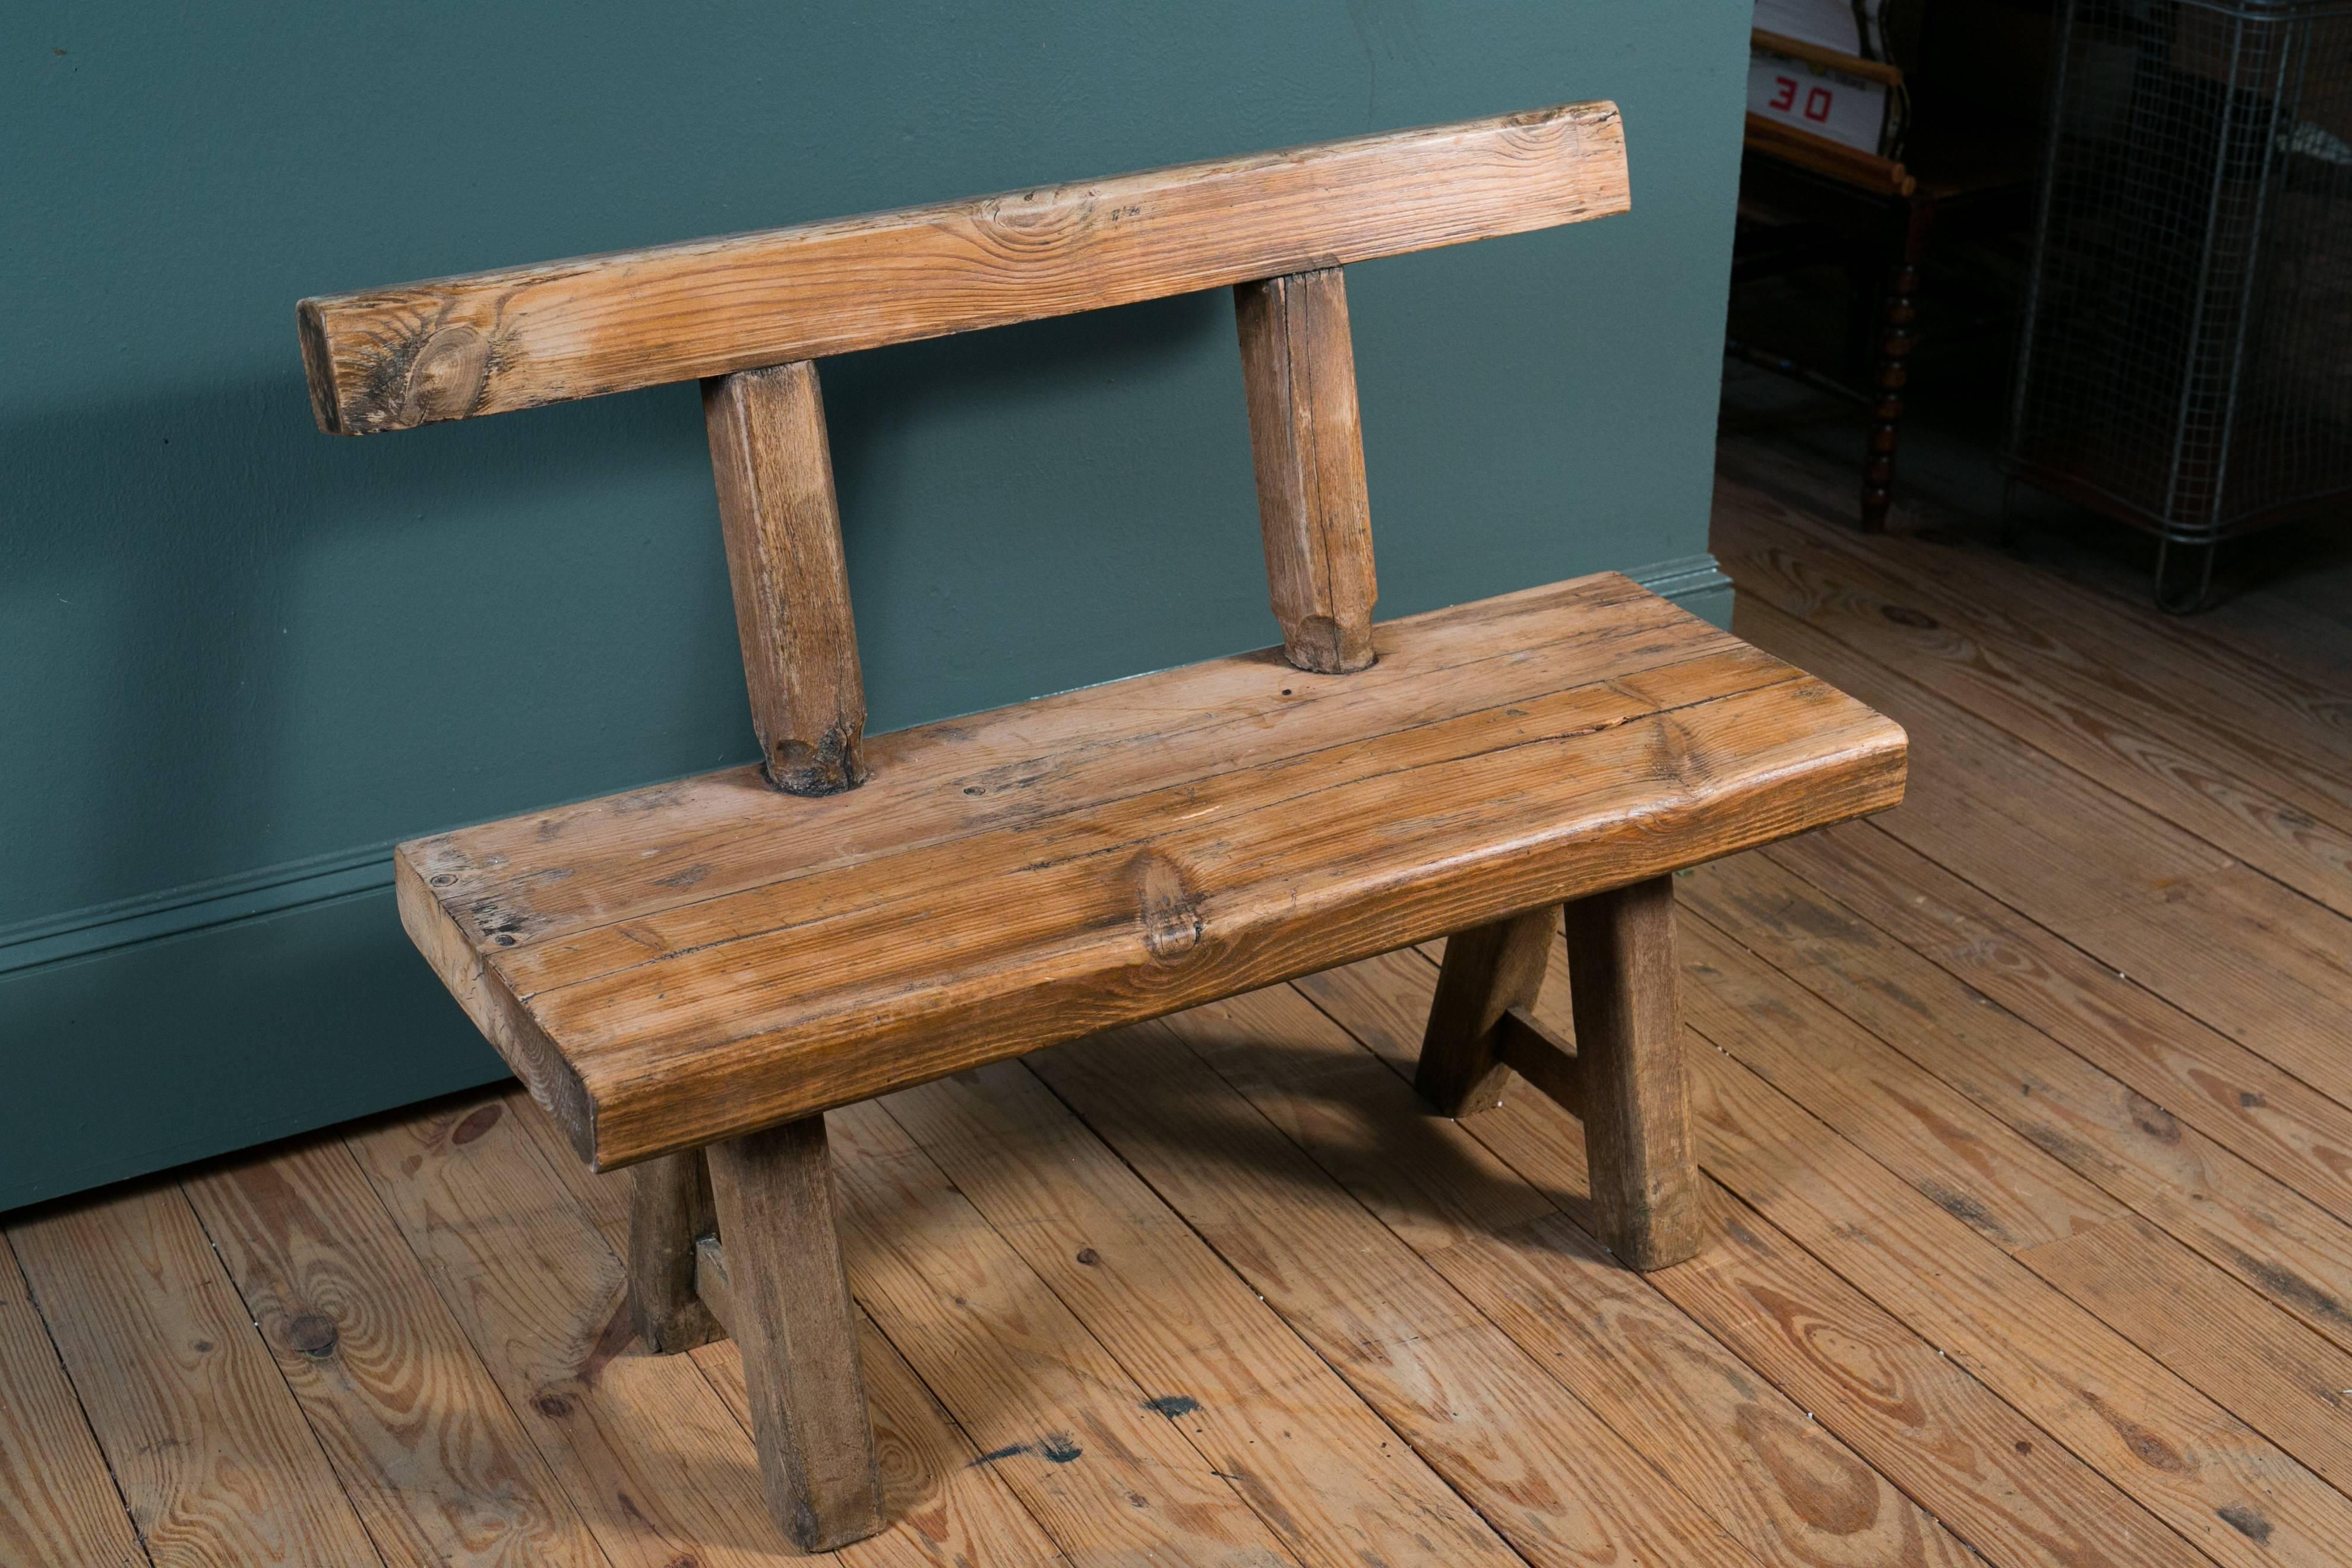 This bench is handmade and came from a beer garden near the Belgian/German border, circa 1920. Massive oak construction with iron brackets. Sturdy and comfortable. Various sizes available. Price and measurement listed is for the one in the photos.